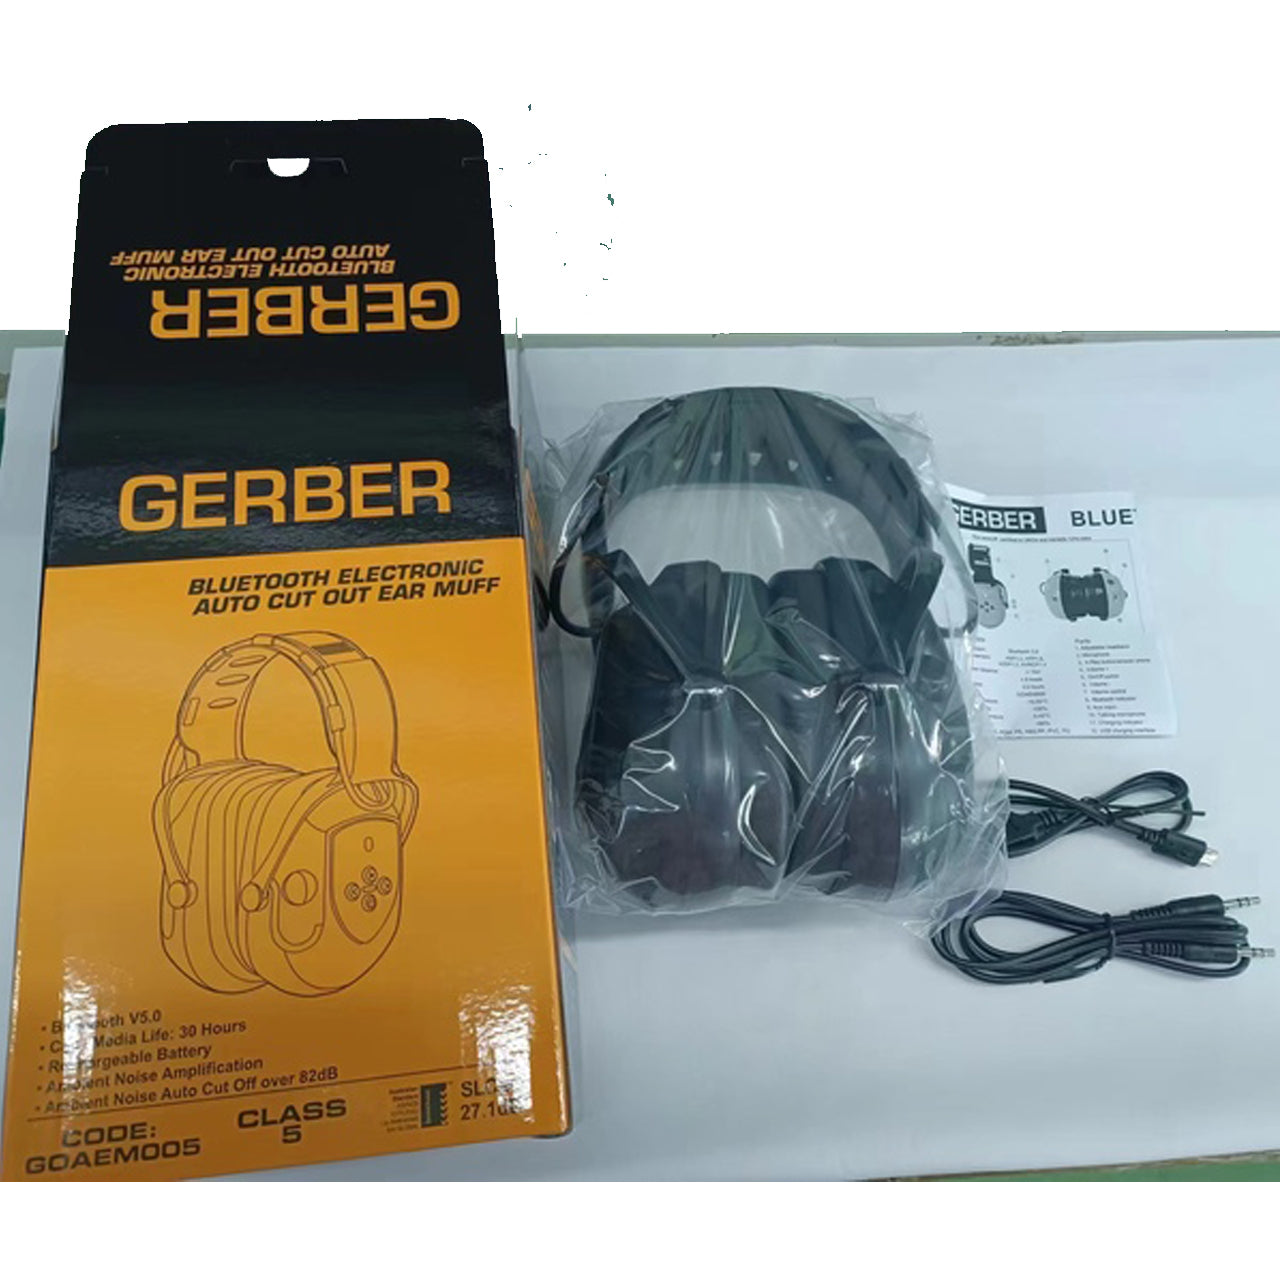 Get everything covered up 1 pair of earmuff hearing protection. Electronic Ear Muffs for ambient noise amplification up to 5x, automatic amplification when noise detected above 82dB. Bluetooth V5.0 connectivity to connect mobile or media device for listening or calls wire free. www.defenceqstore.com.au